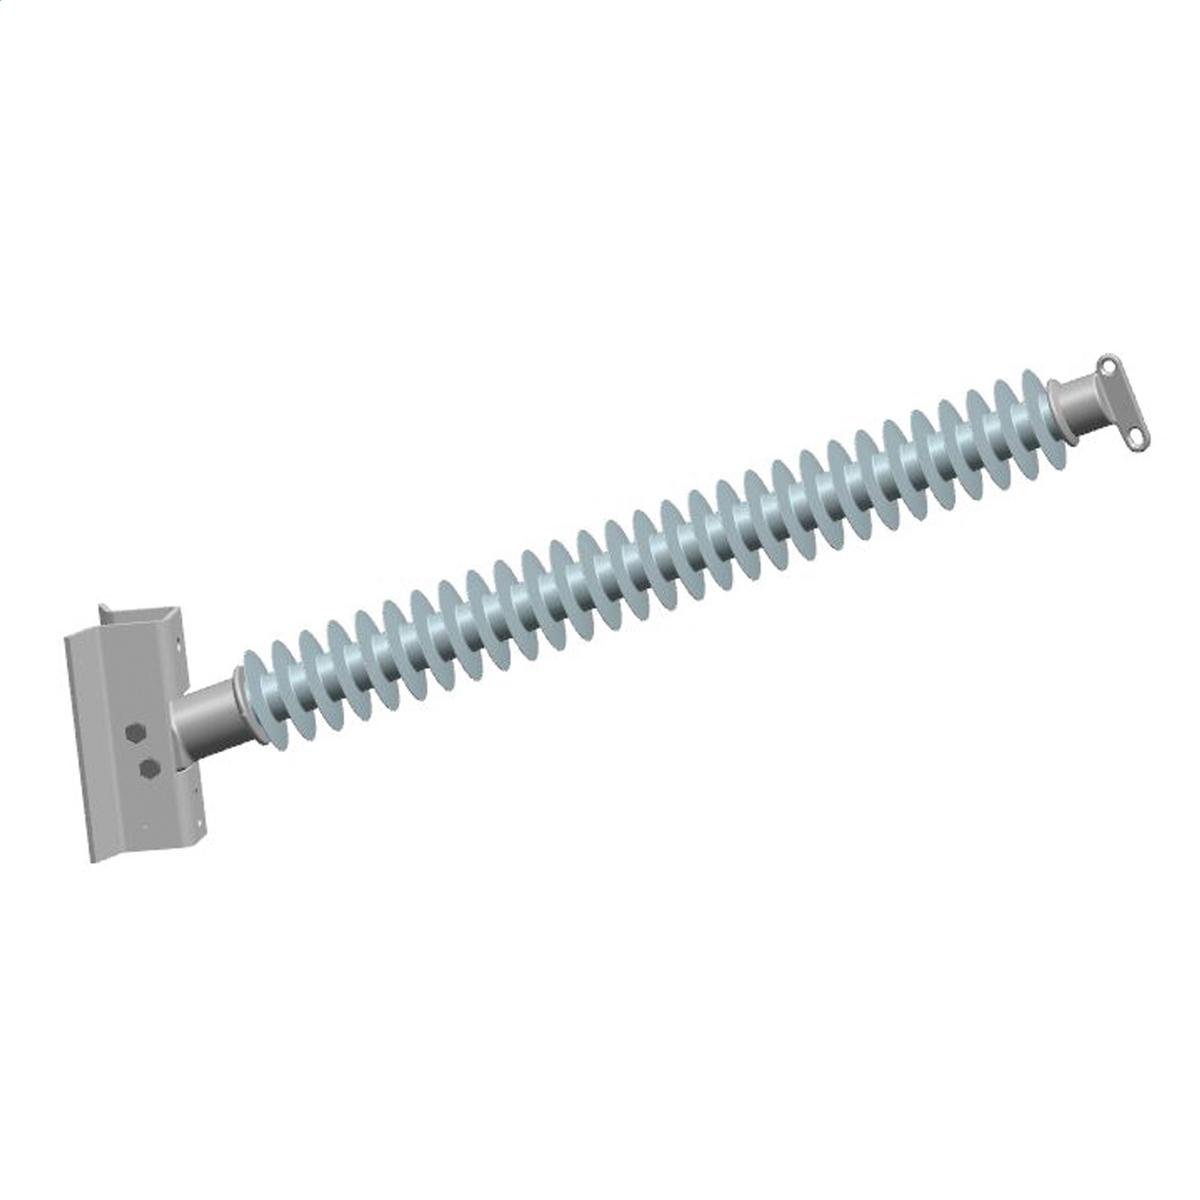 Hubbell P250041S0080 2.5" Line Post, Std. Leak, 2 Hole blade, Steel flat base 8x13/12" CL 7/8" bolts  ; Made from hydrophobic silicone polymer ; 